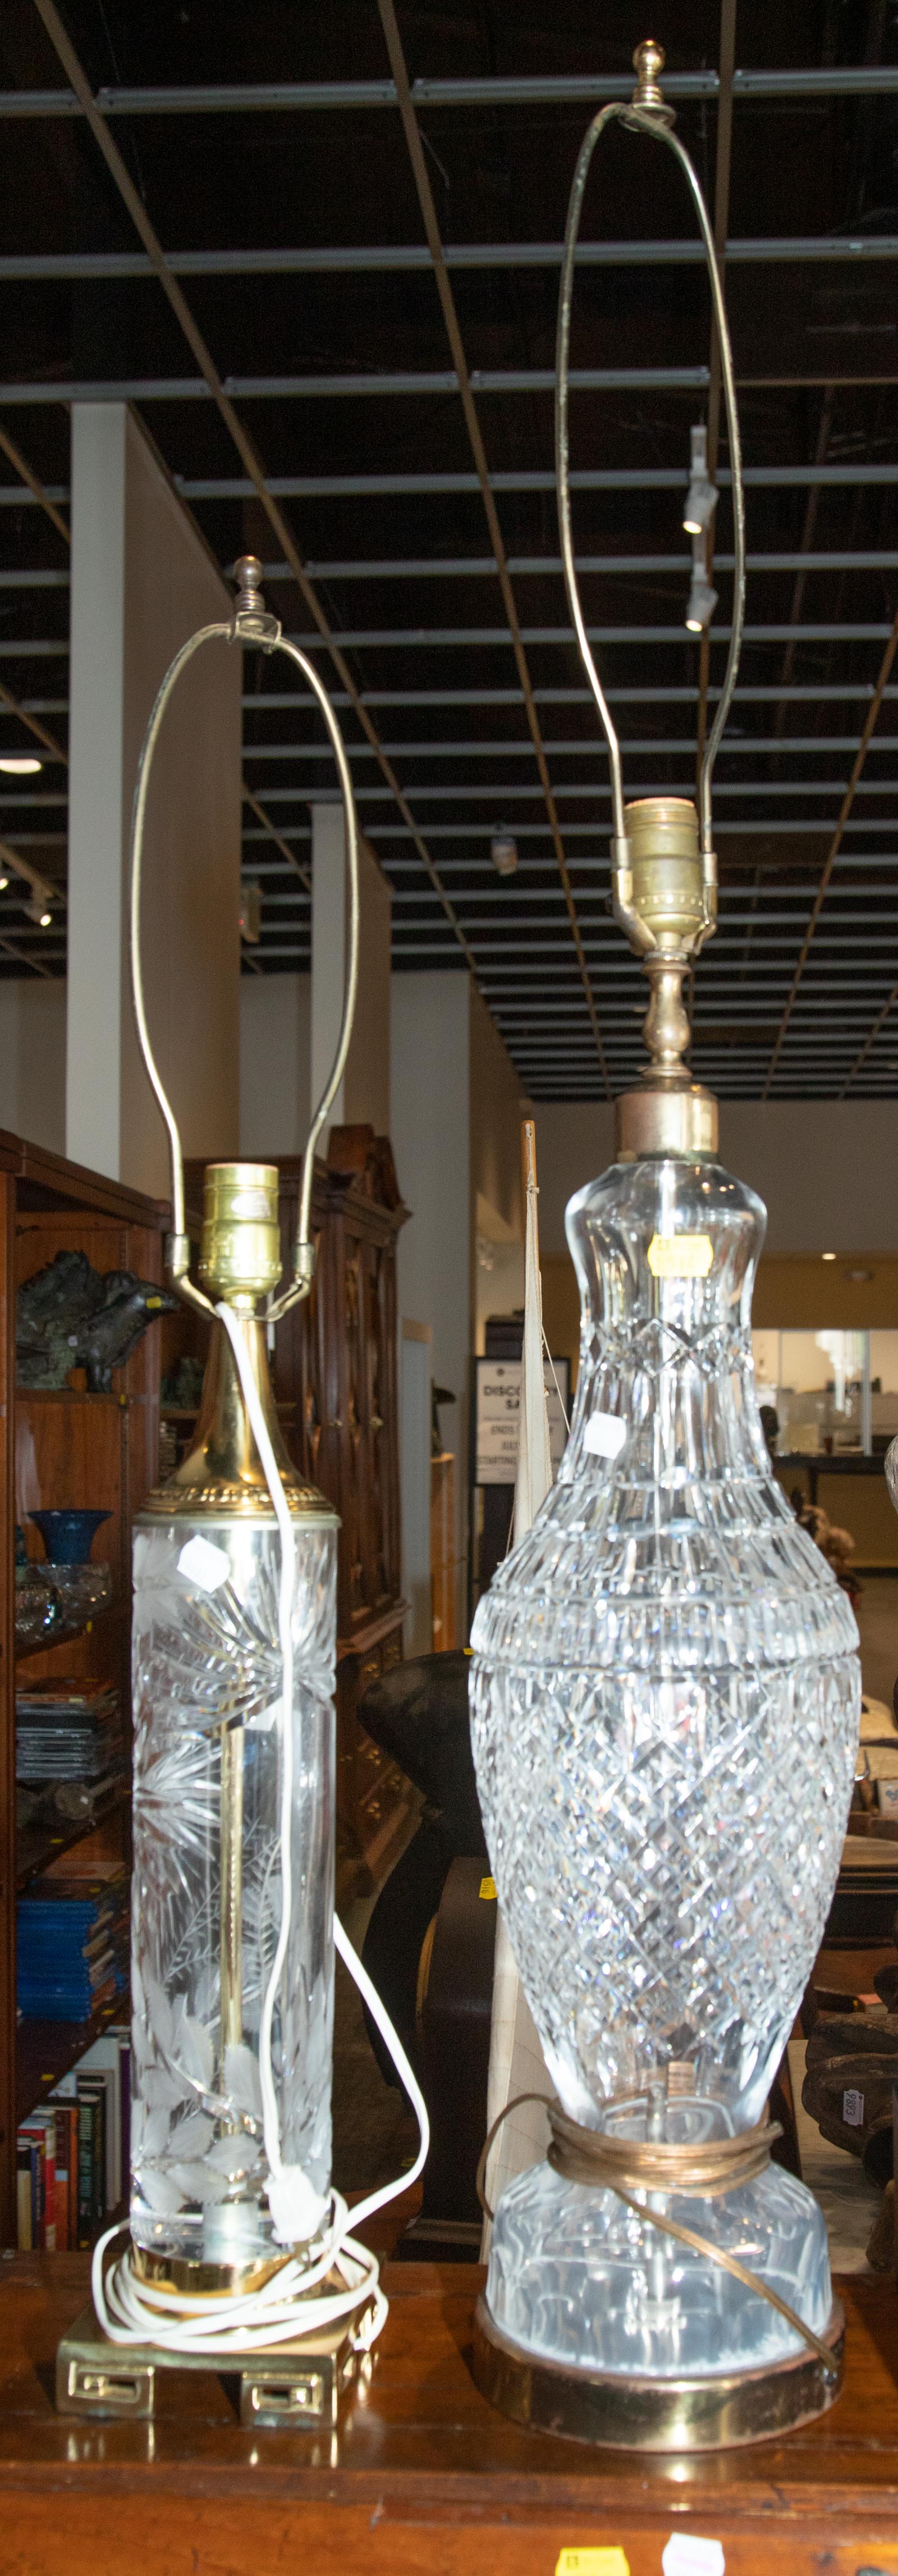 TWO CUT GLASS LAMPS Pressed cut and